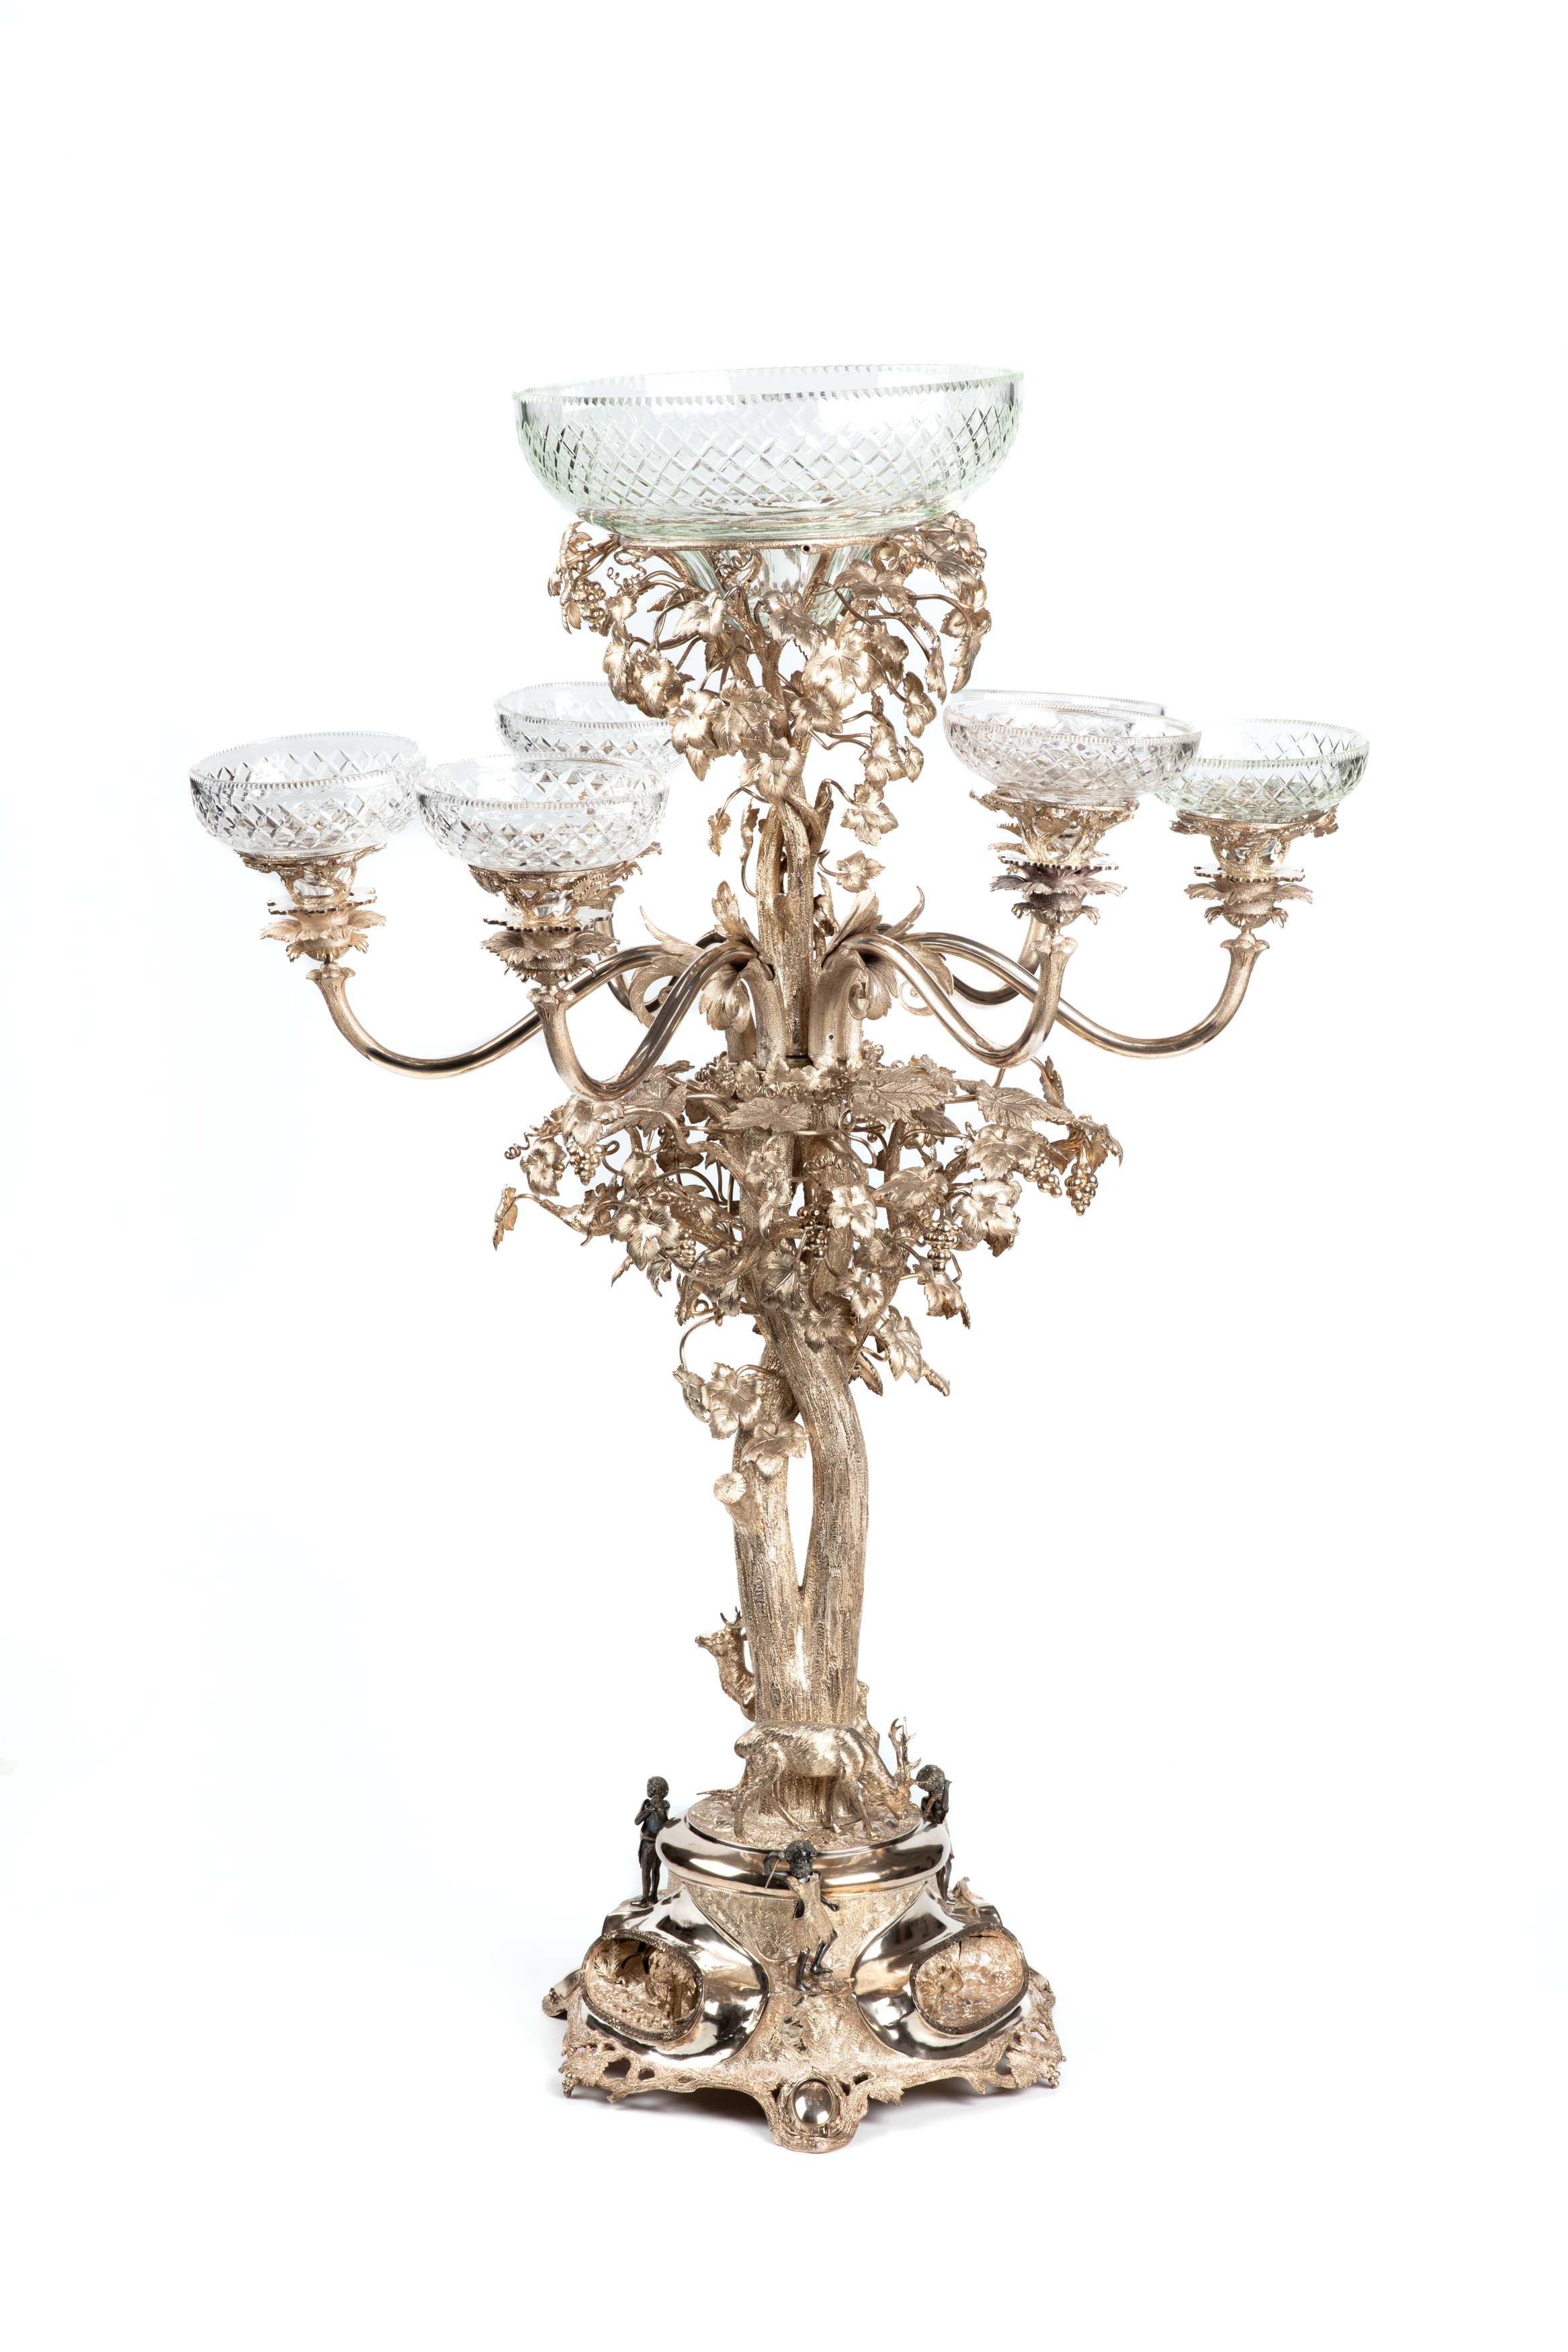 Silver epergne by J Henry Steiner